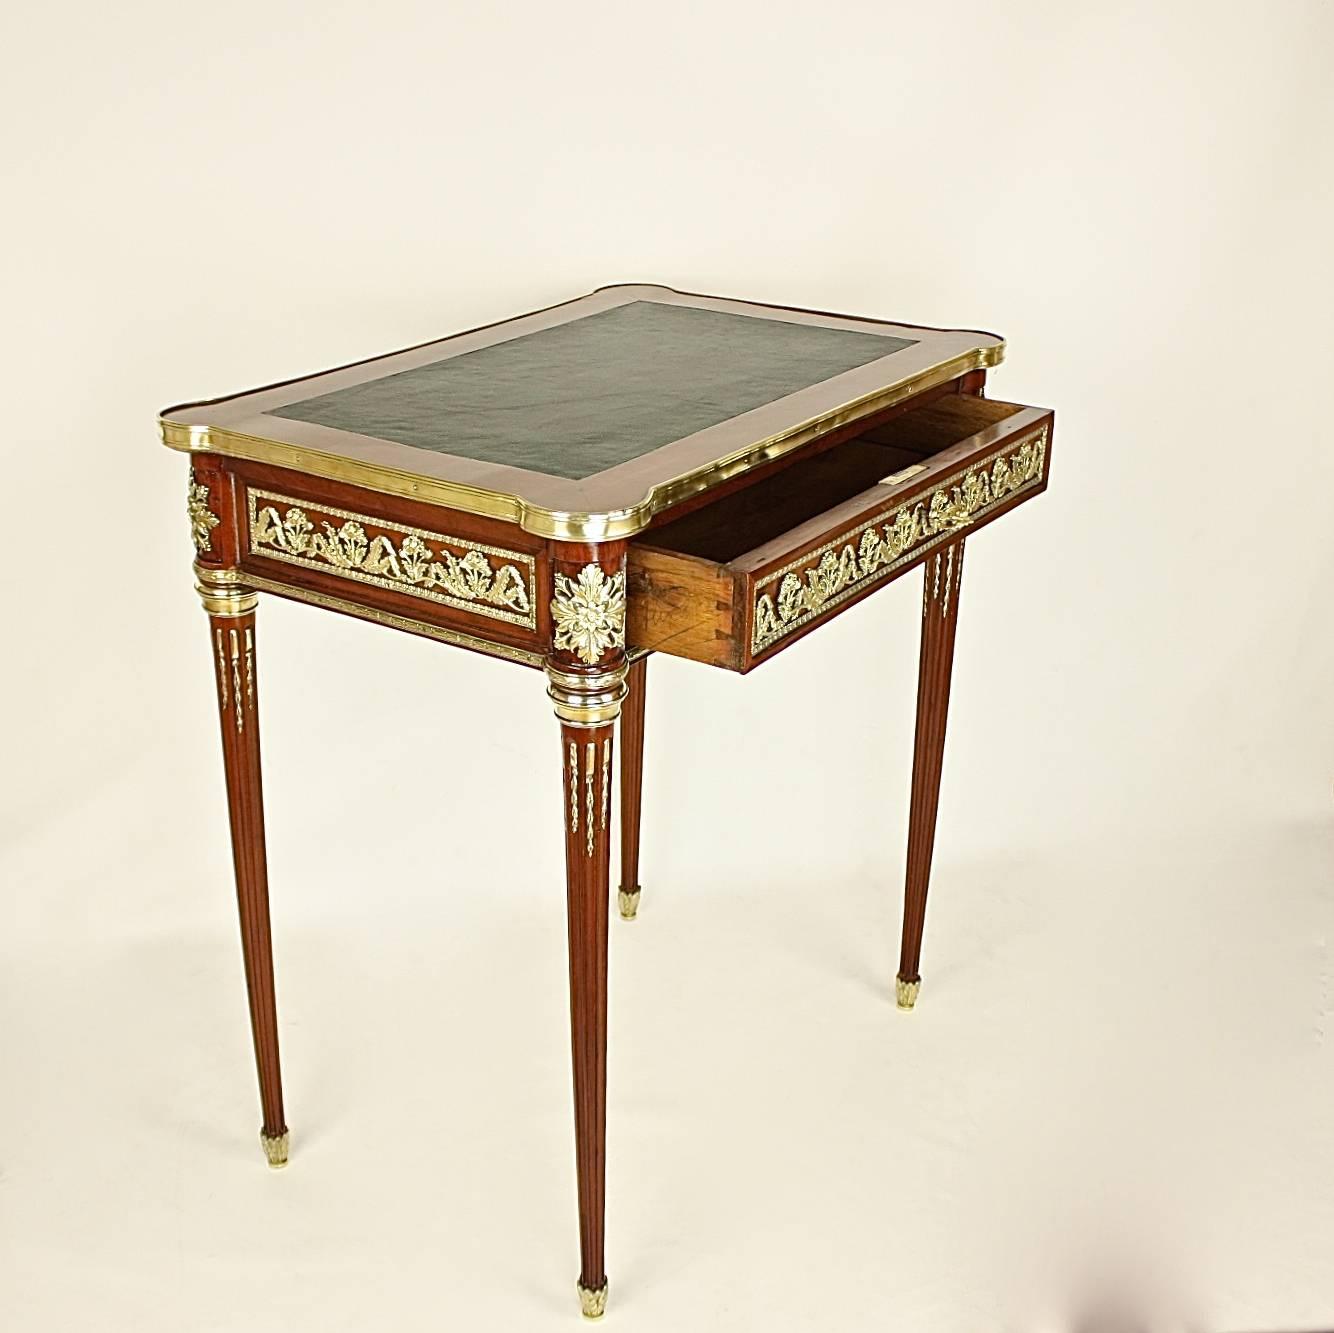 A rare and small 19th century, Louis XVI style bureau plat veneered in burr mahogany on an oak carcase set with brass mounts. The writing top covered with a green leather surface, the top accentuated by projecting round forecorners and further